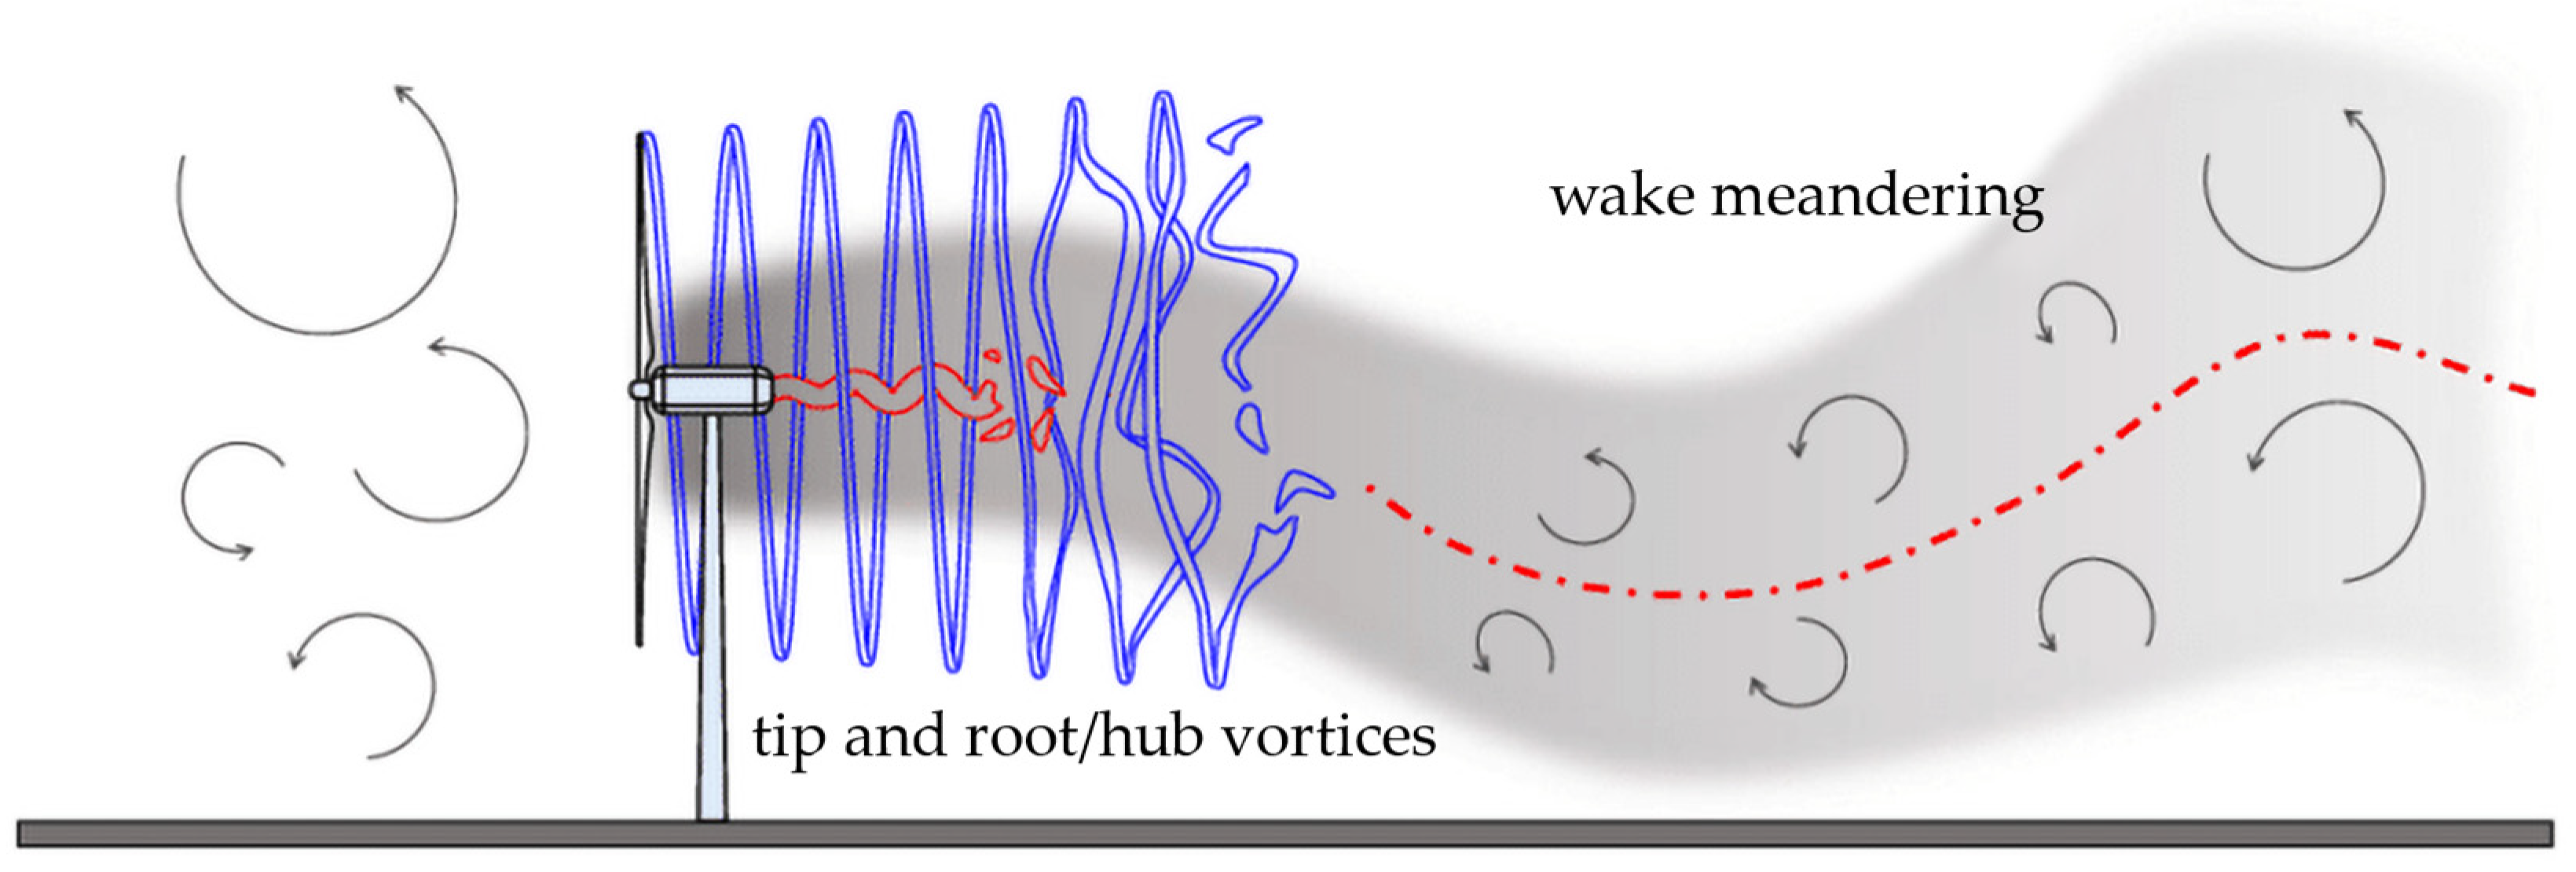 Energies | Free Full-Text | Far-Wake Meandering of a Wind Turbine